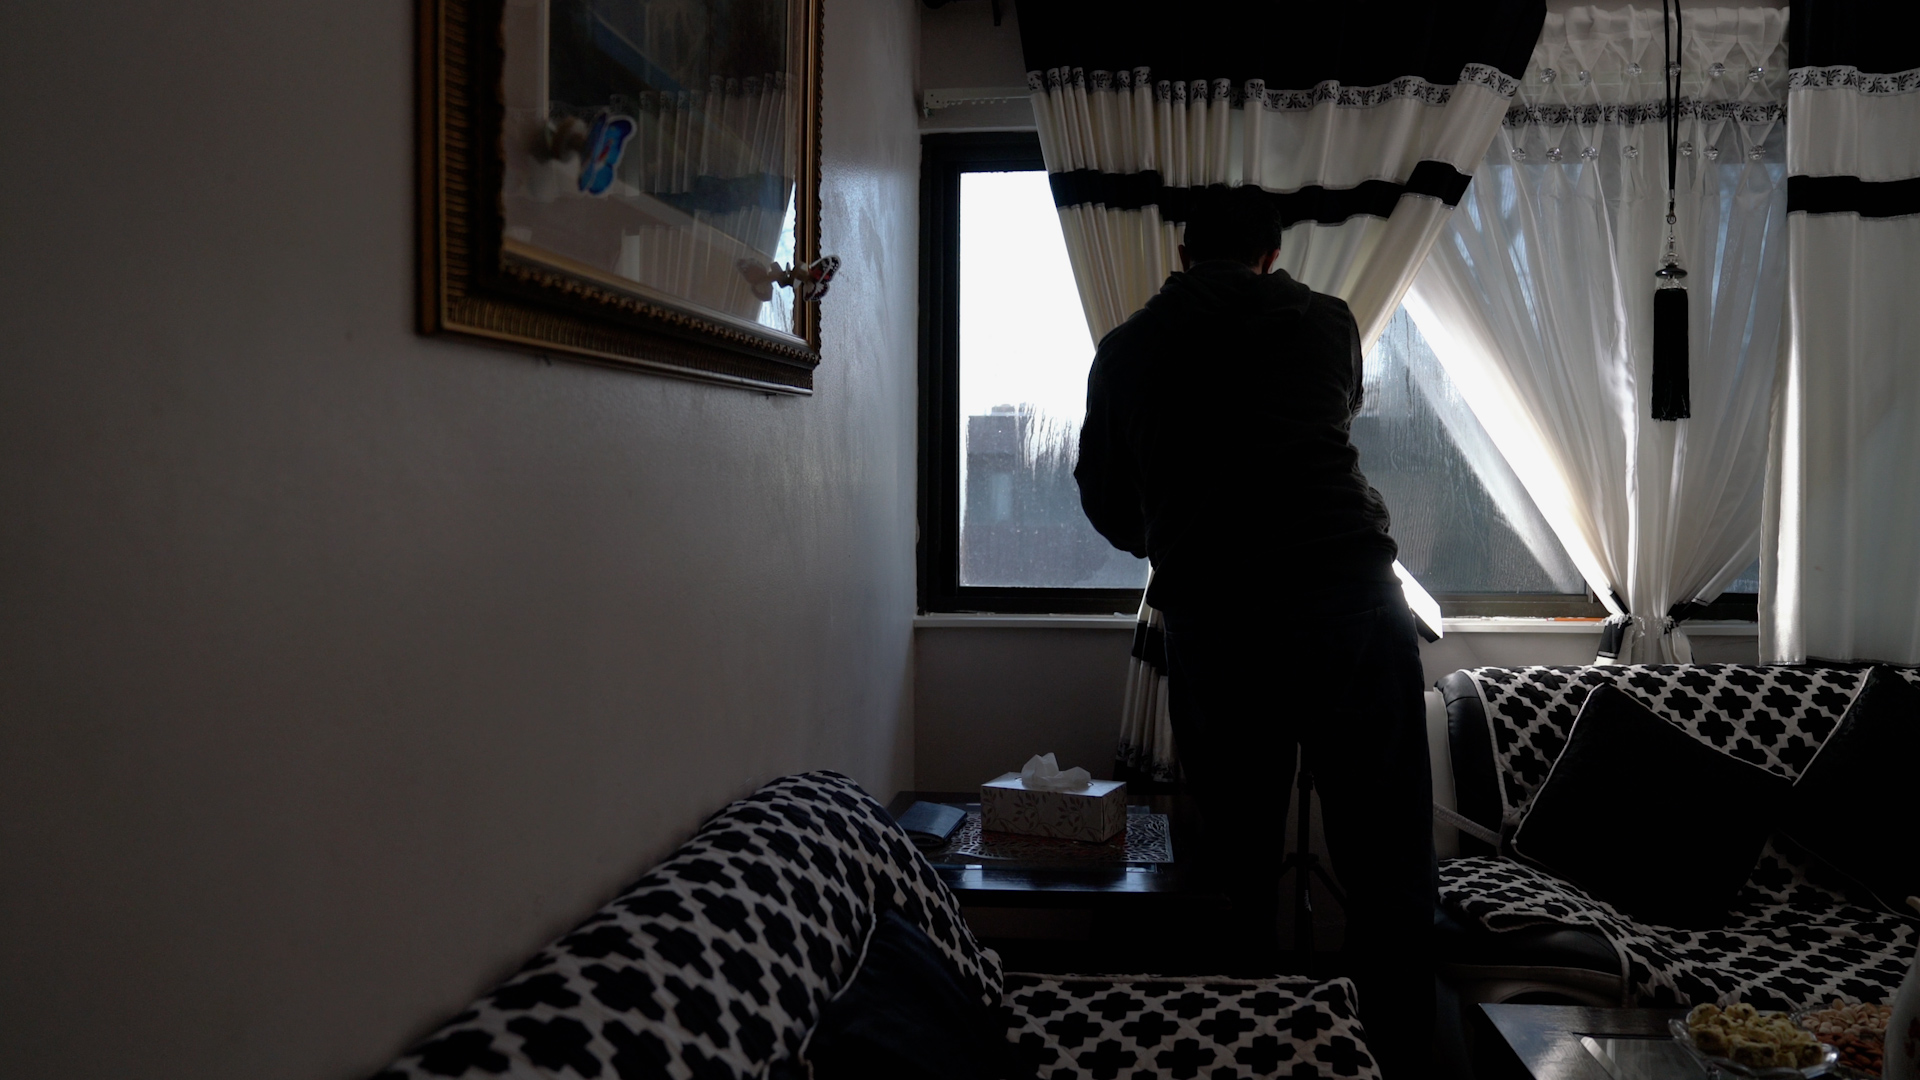 Khalid stands behind curtains framing a window and between couches inside an apartment.